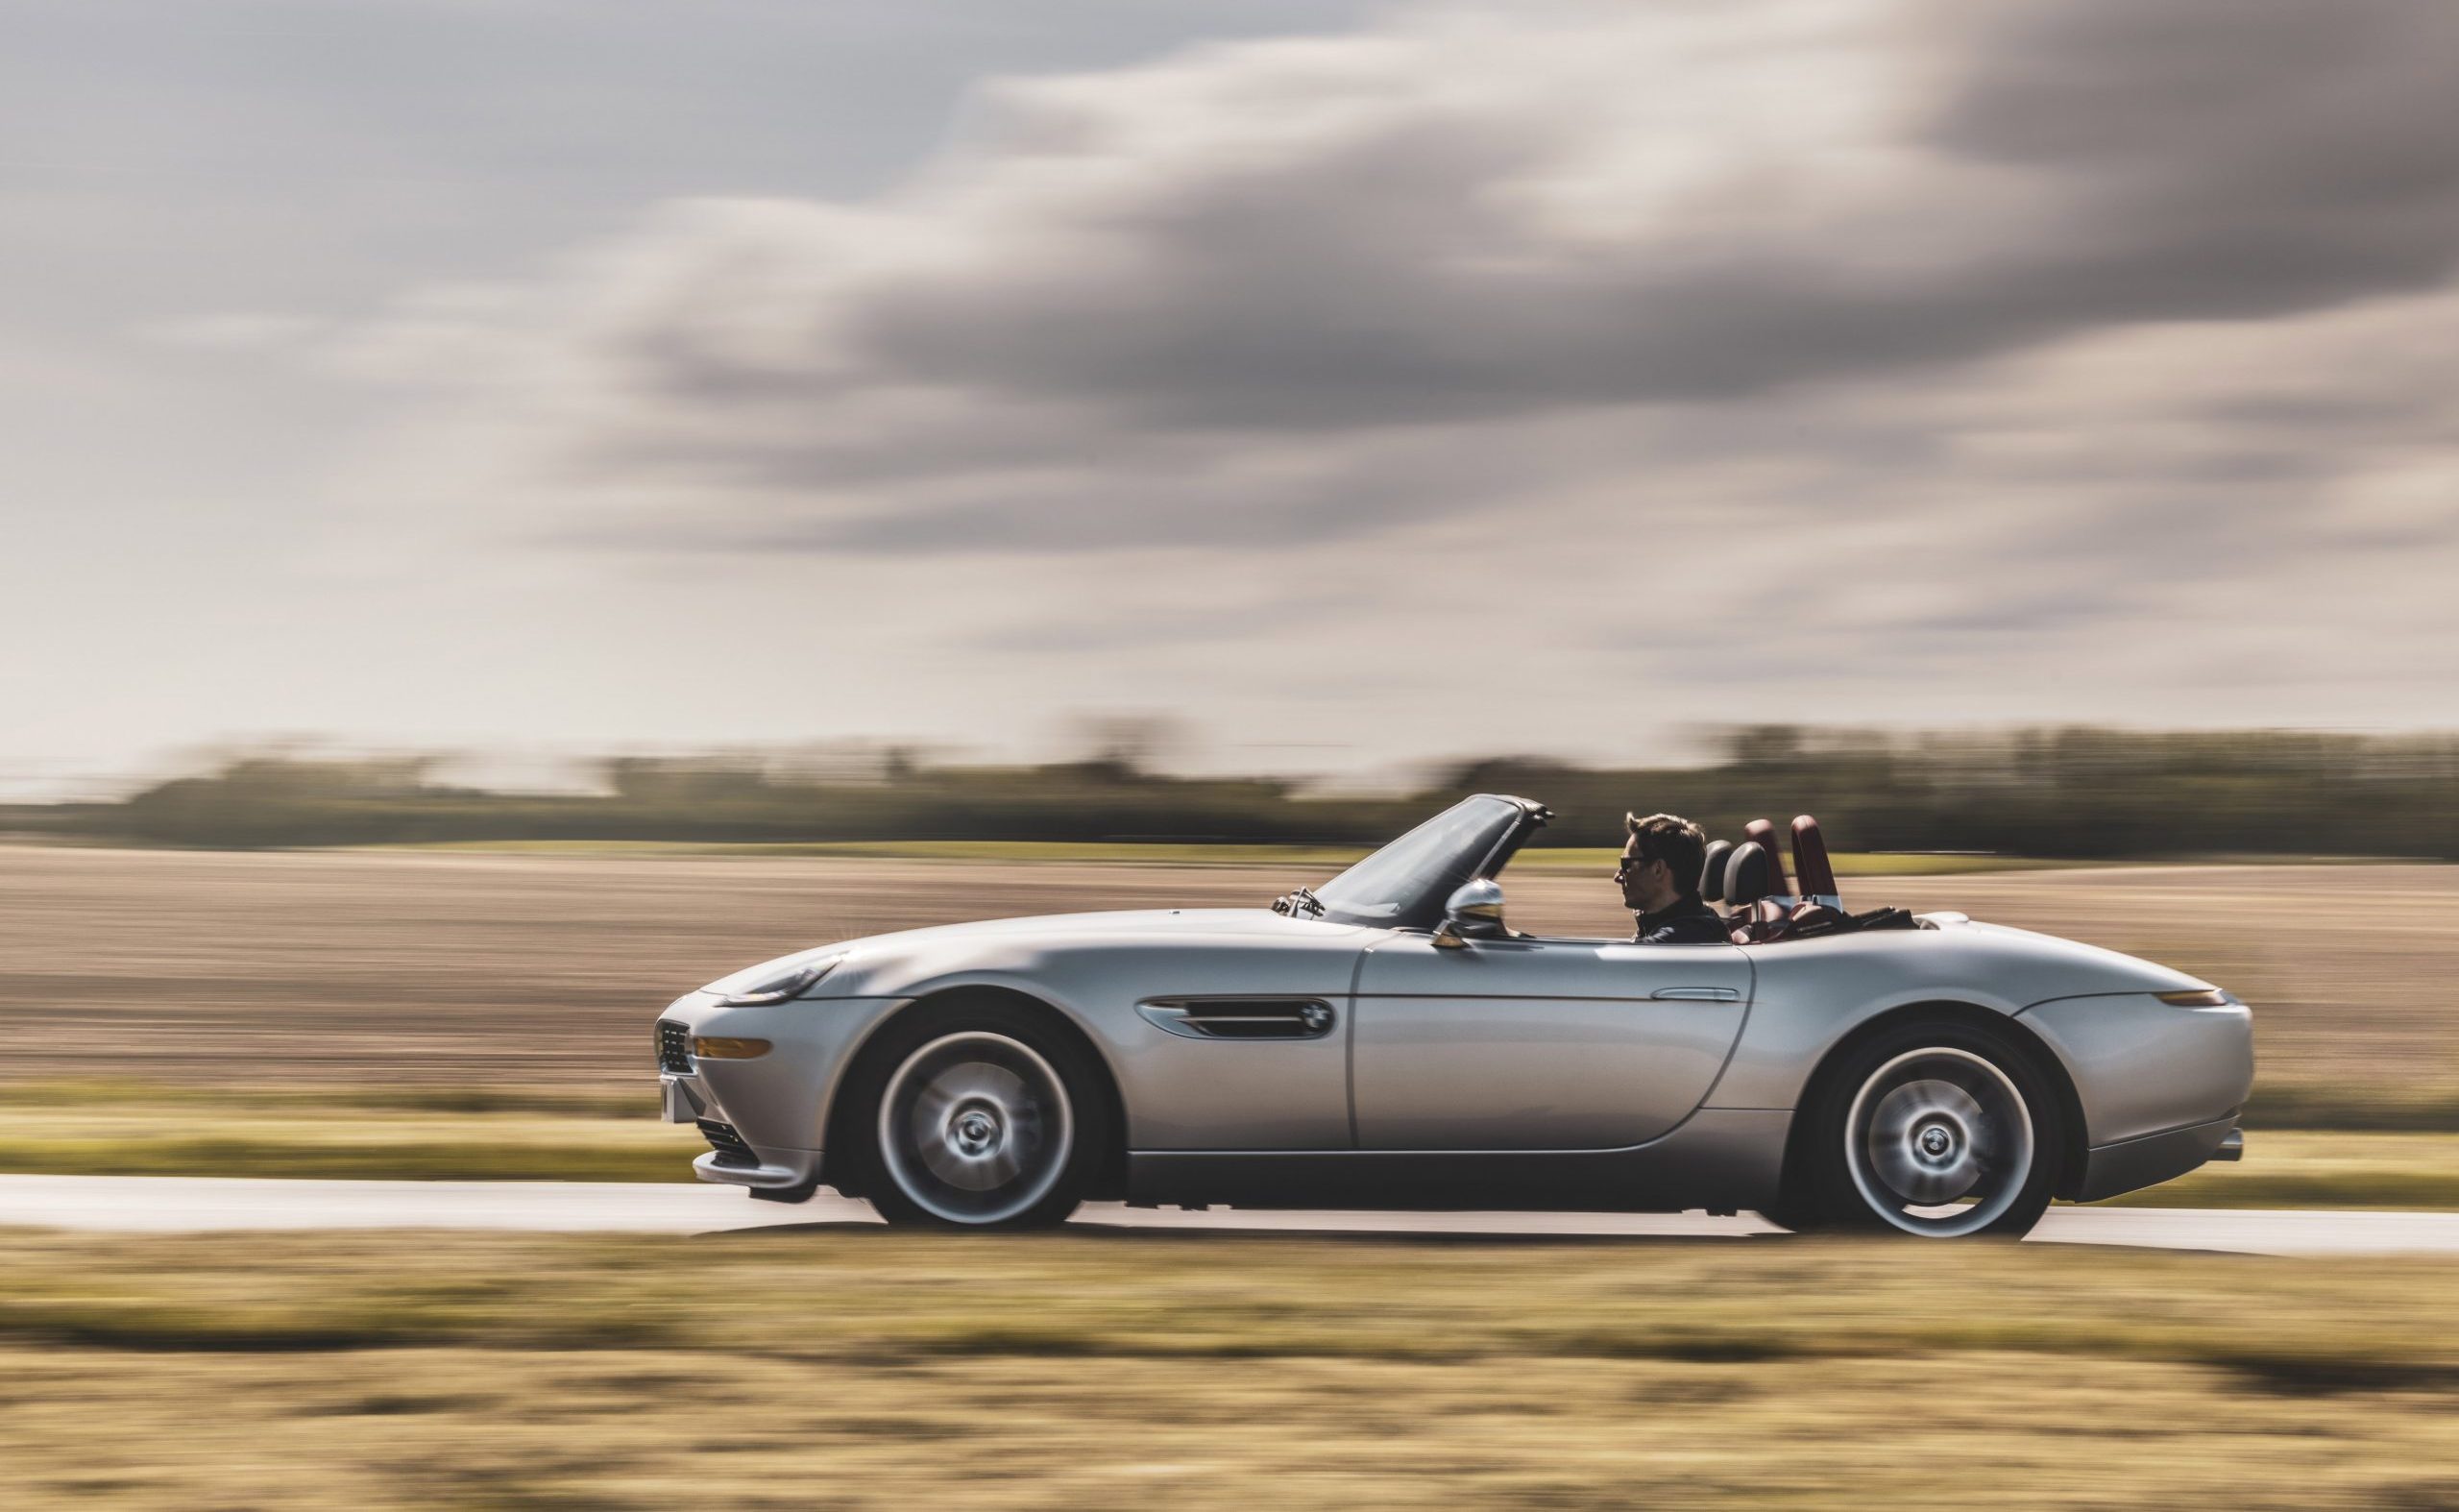 The BMW Z8 had 507 reasons to exist